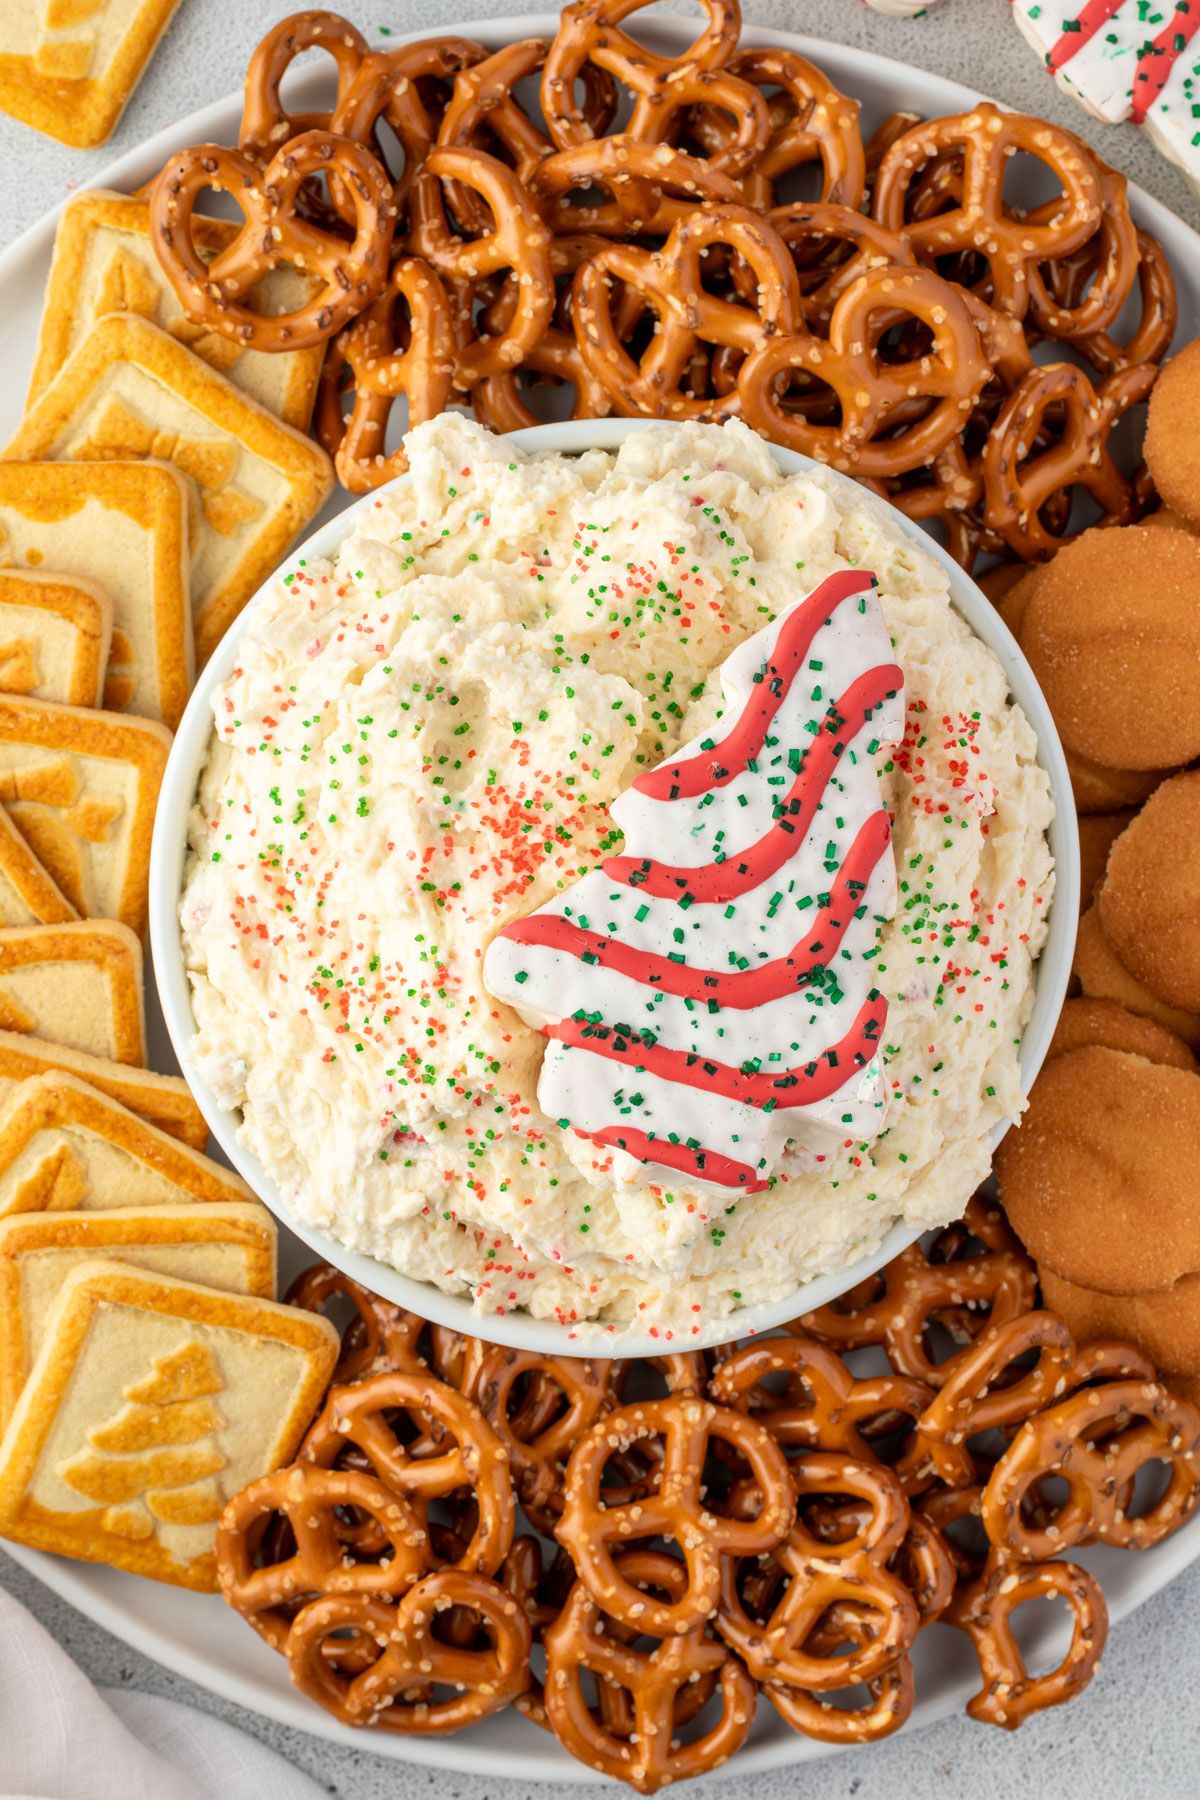 Cream cheese dip with red and green sanded sugar sprinkles in a white bowl, garnished with a Christmas tree cake on a platter with pretzels and cookies.